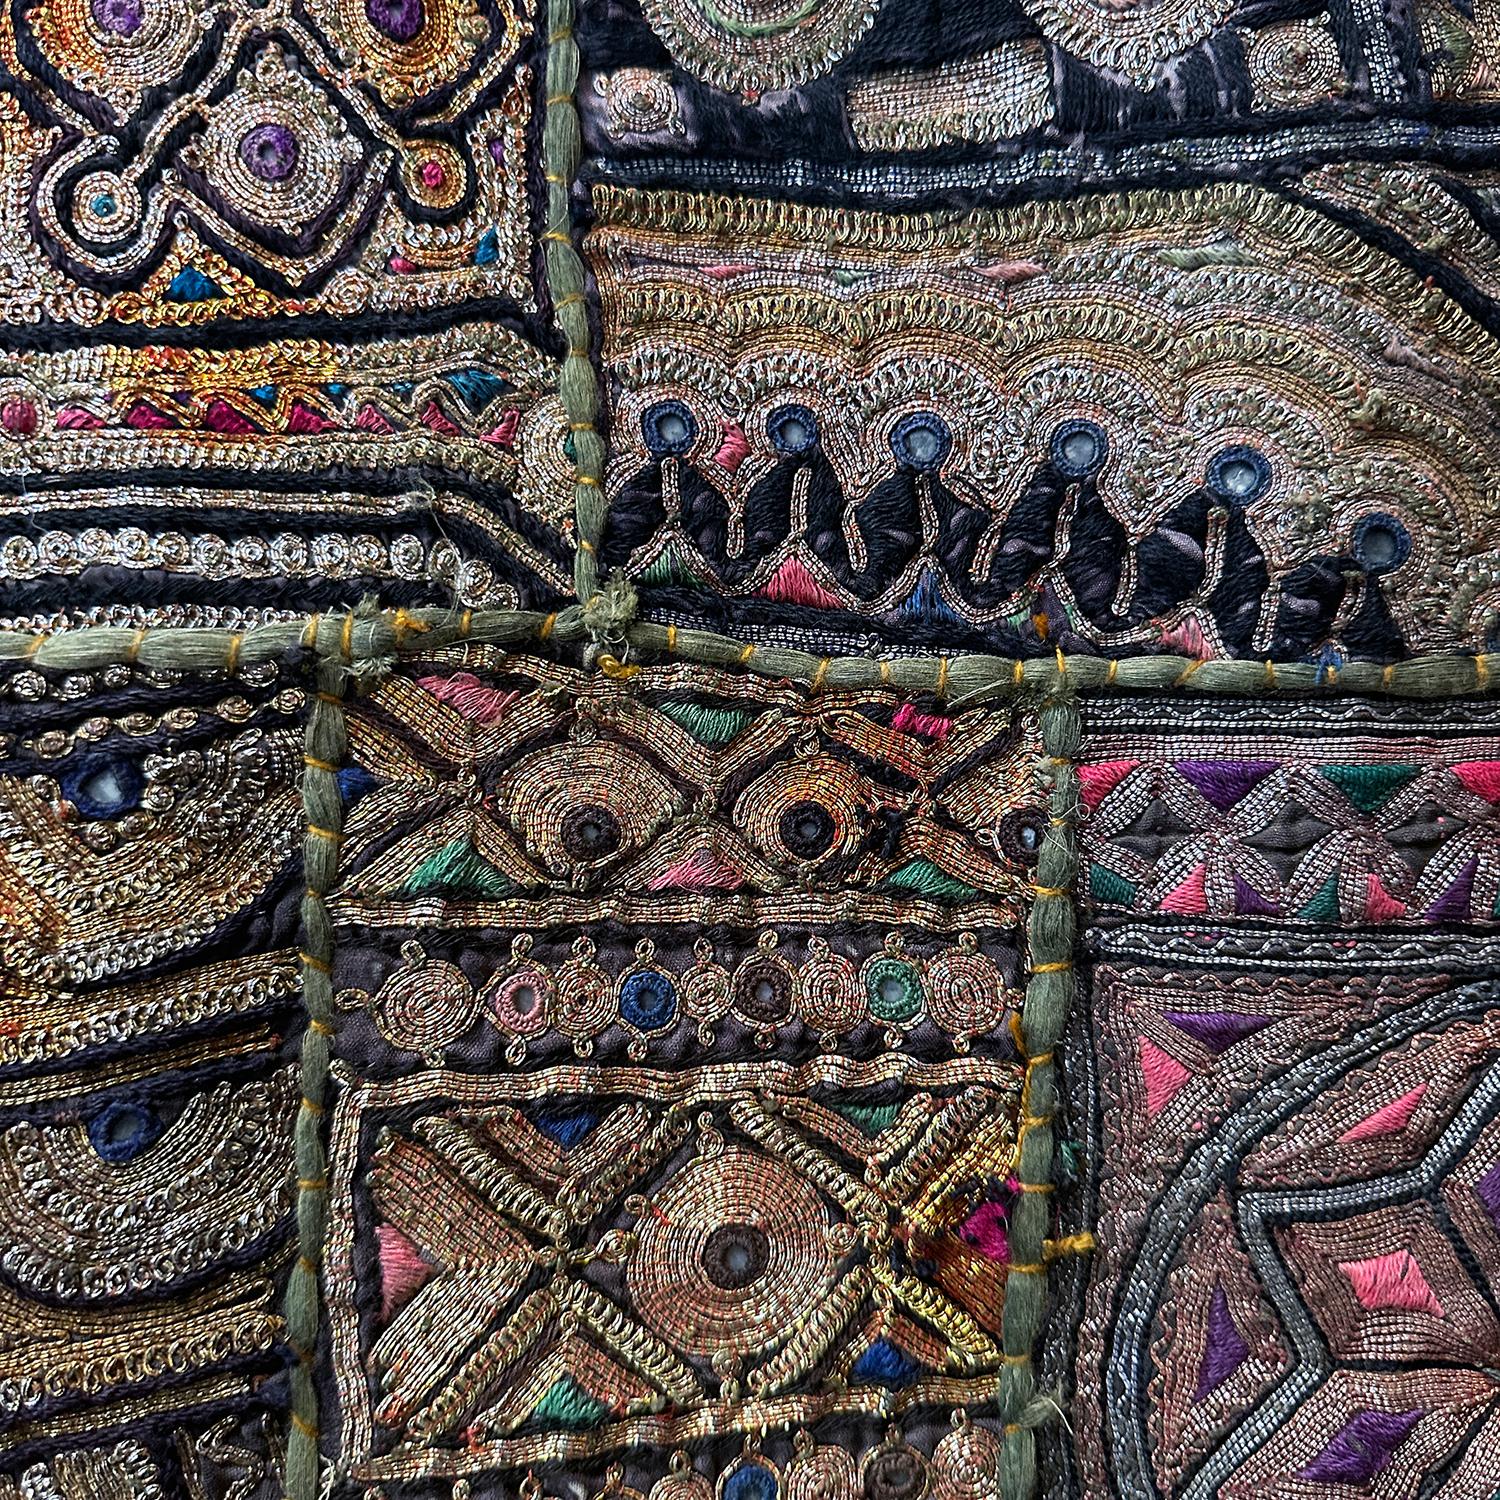 Vintage Rajasthani Patchwork Tapestry, handcrafted, of several small irregular embroidered “patches” heavily embroidered with gold and silver paper-wrapped threads  couched down in a multitude of colors, some with reflective mirror backed portions,